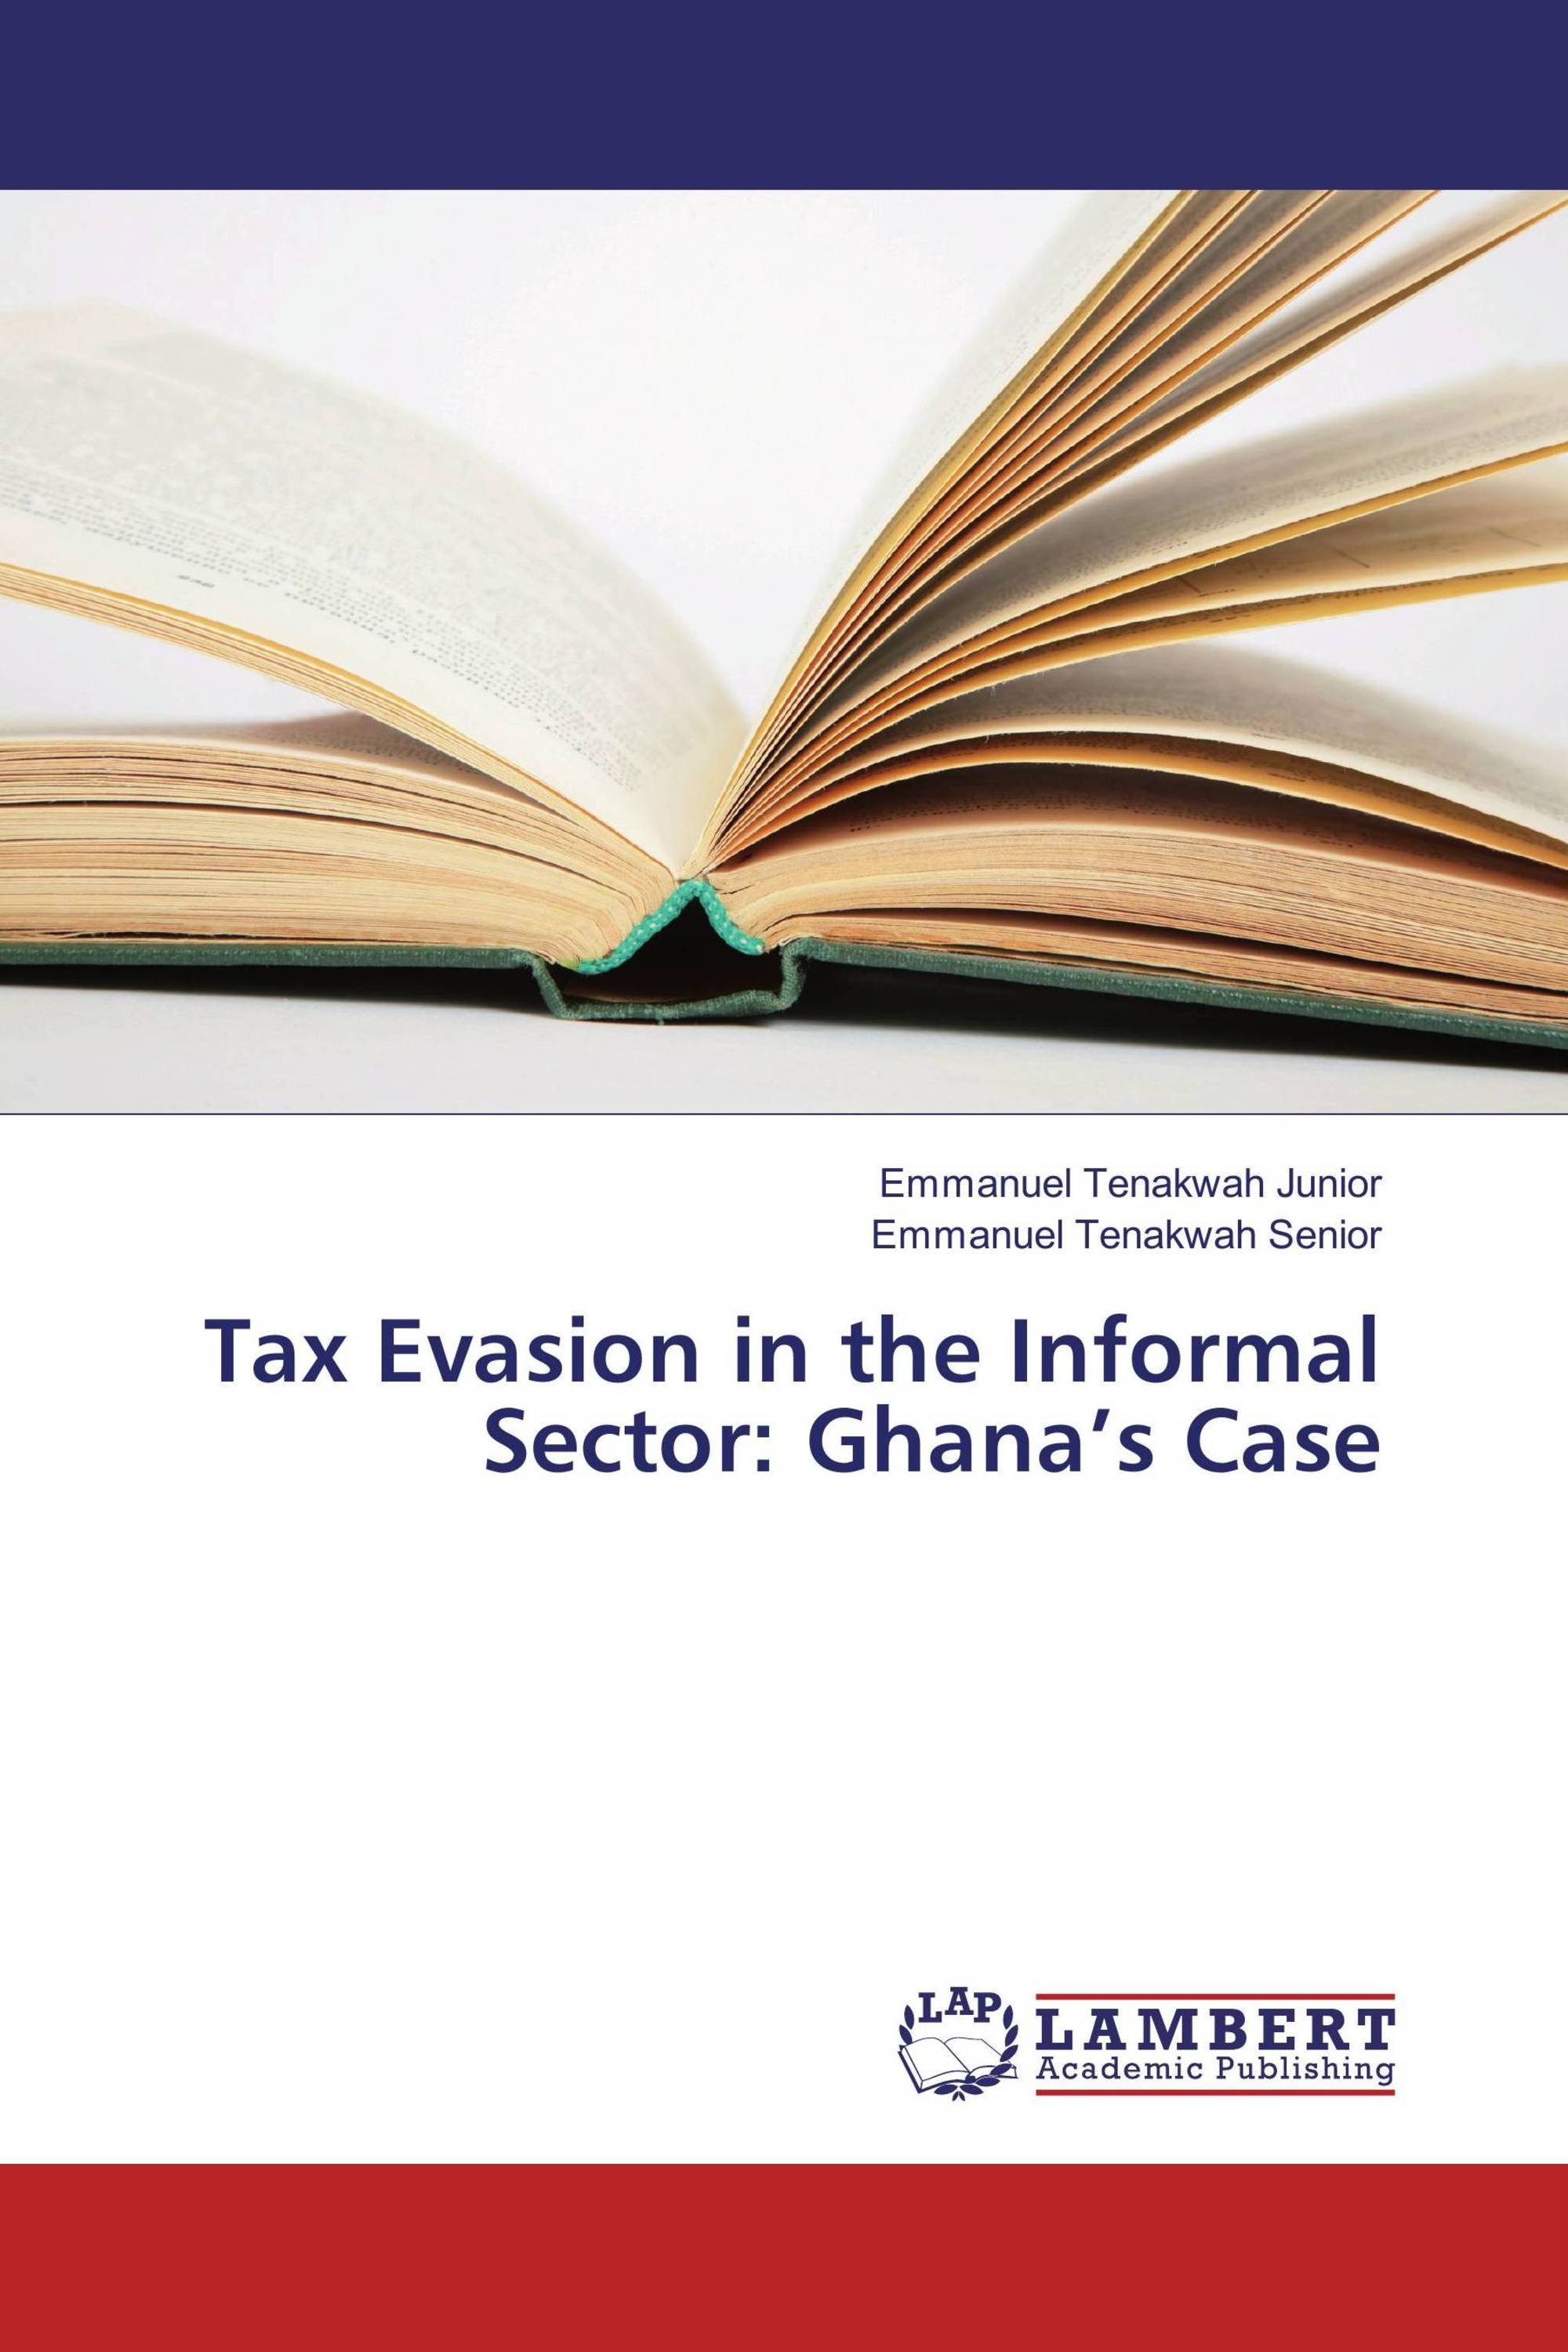 Tax Evasion in the Informal Sector: Ghana’s Case